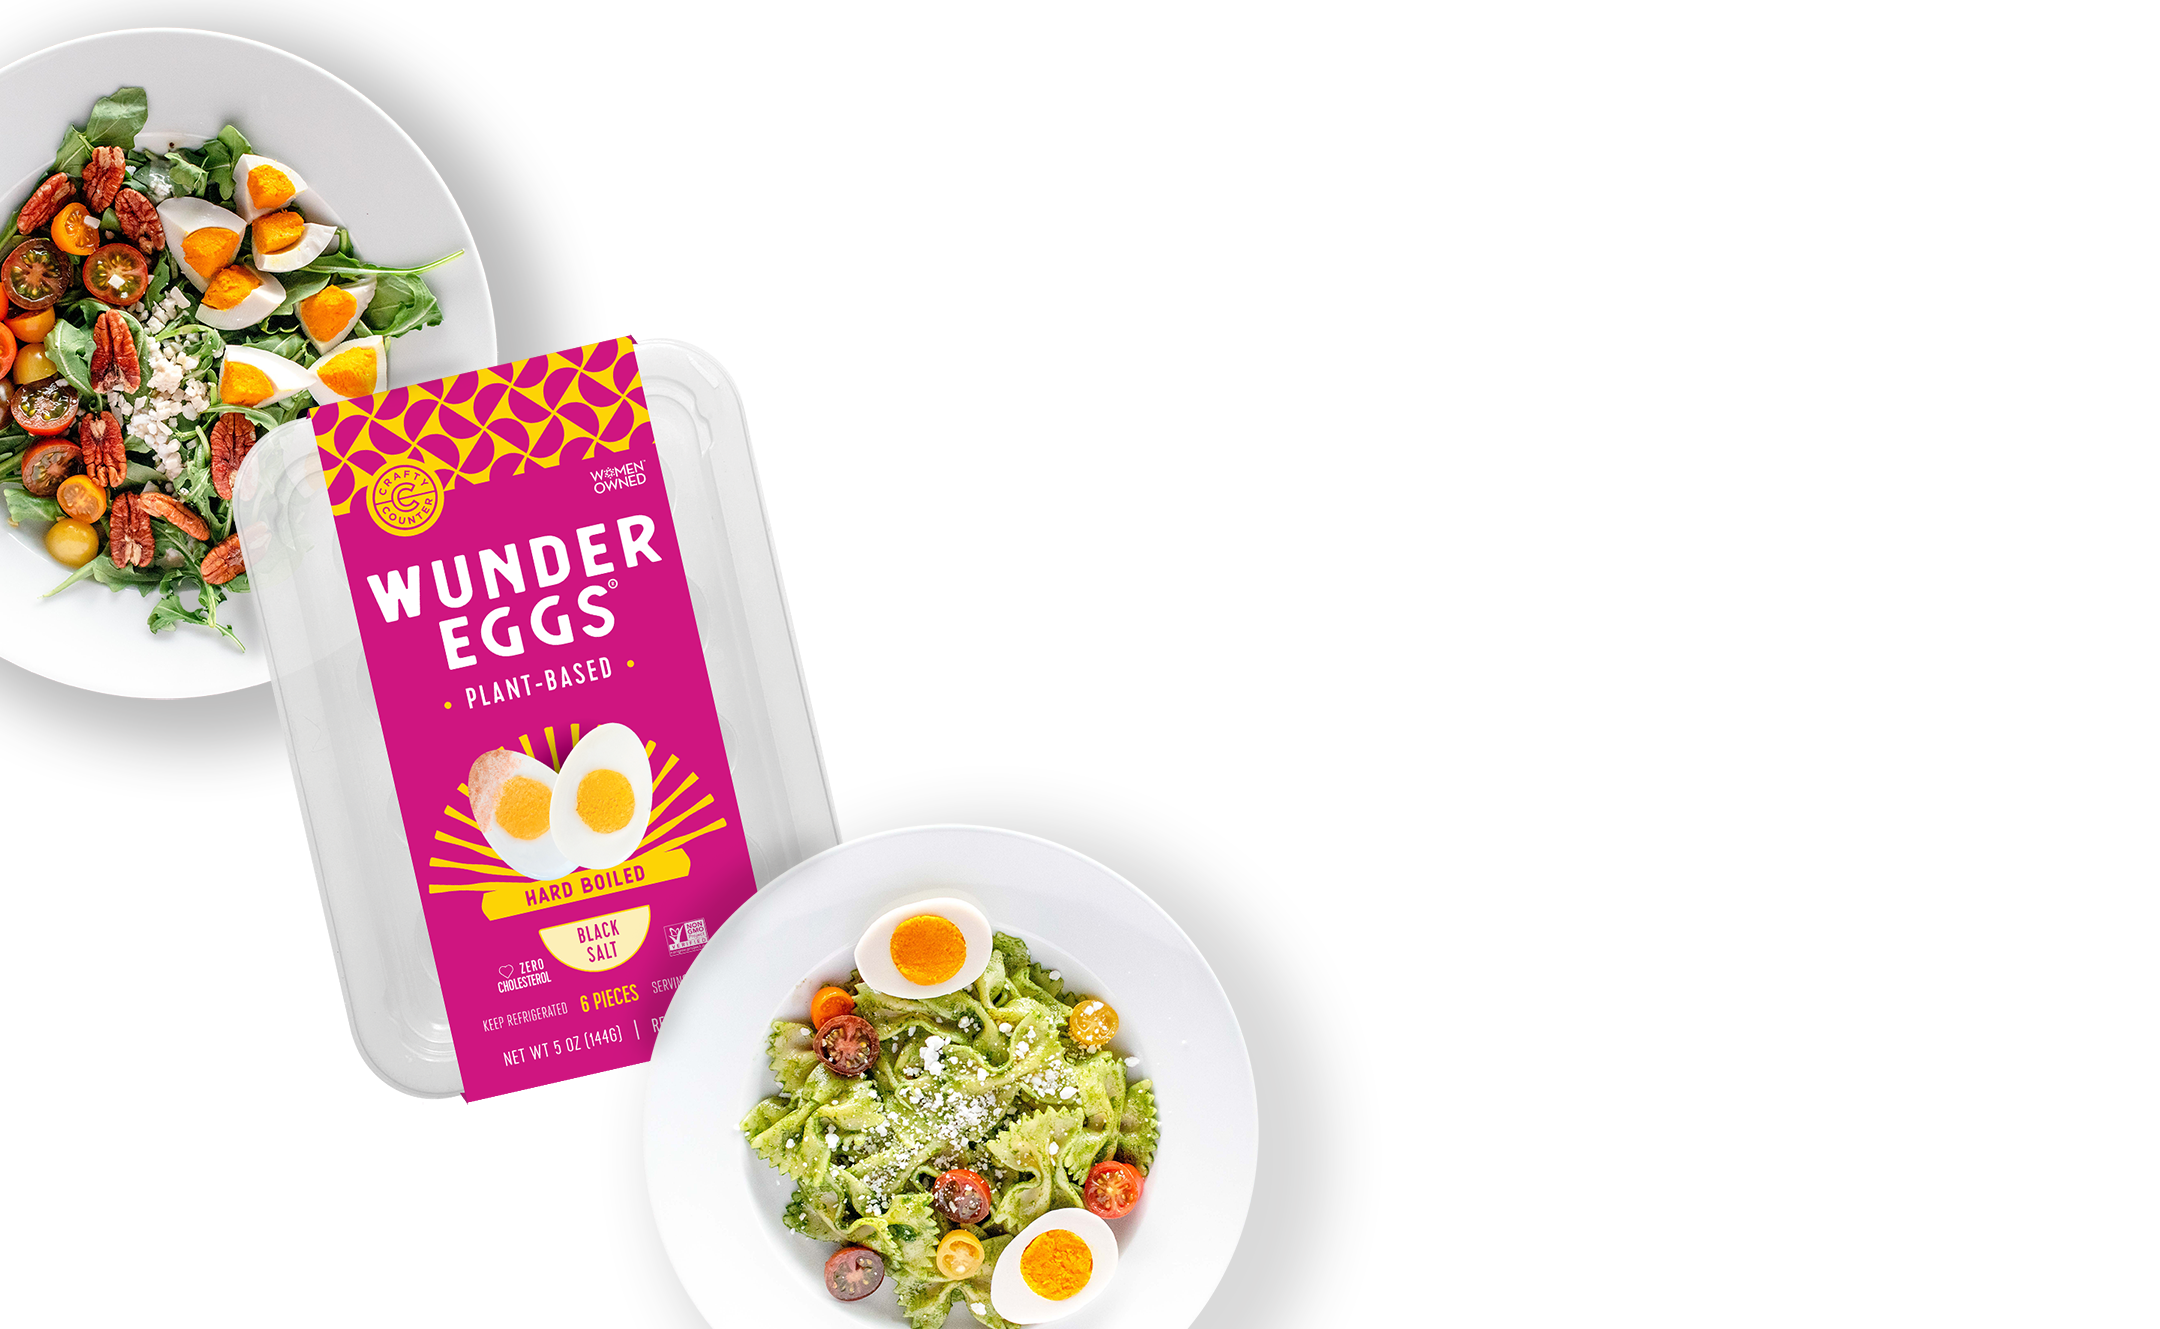 Just Egg Review - Make It Dairy Free